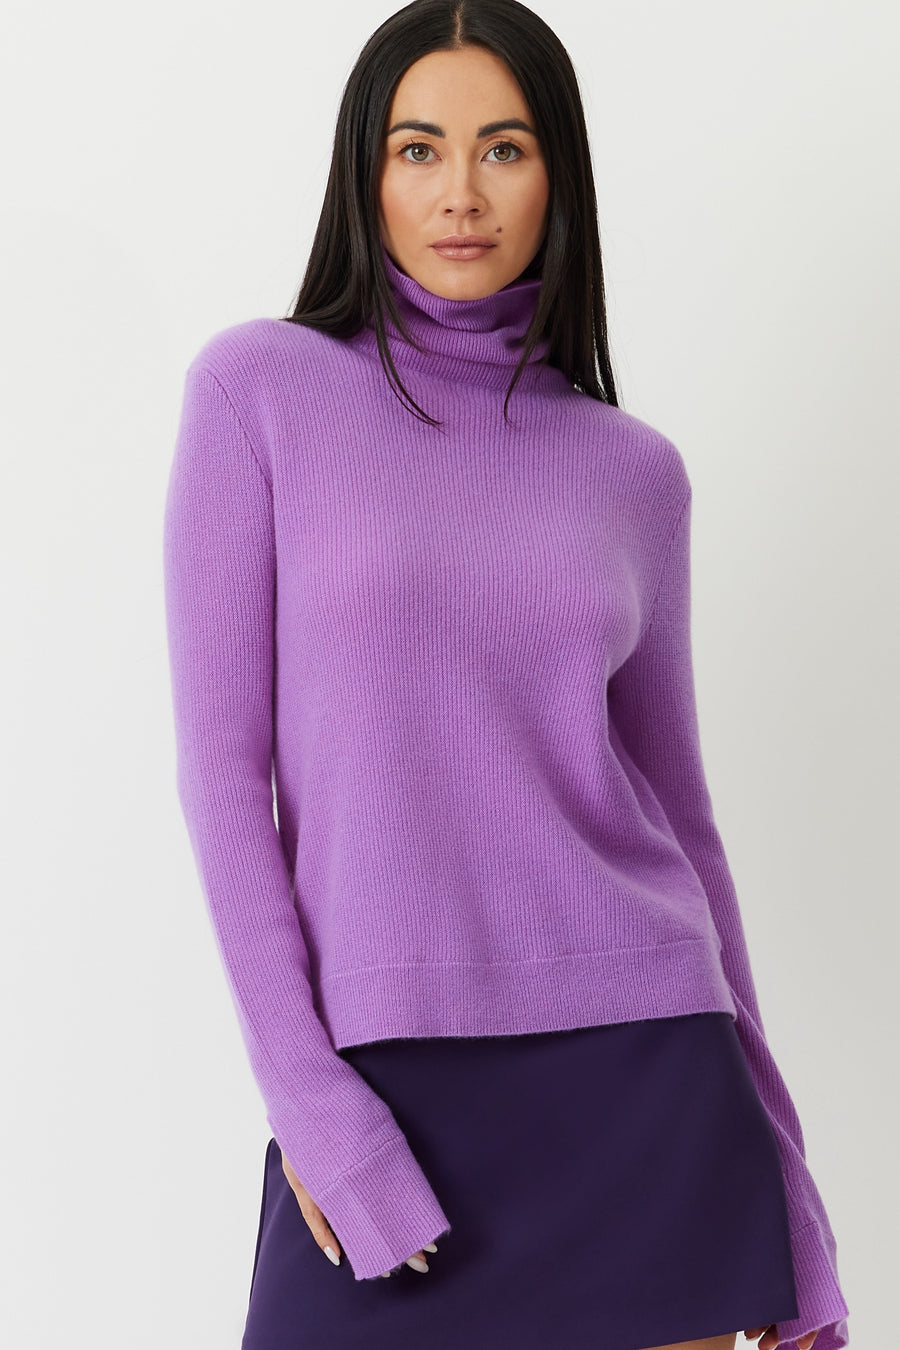 SWATCH THE LESLIE TURTLE NECK CASHMERE SWEATER